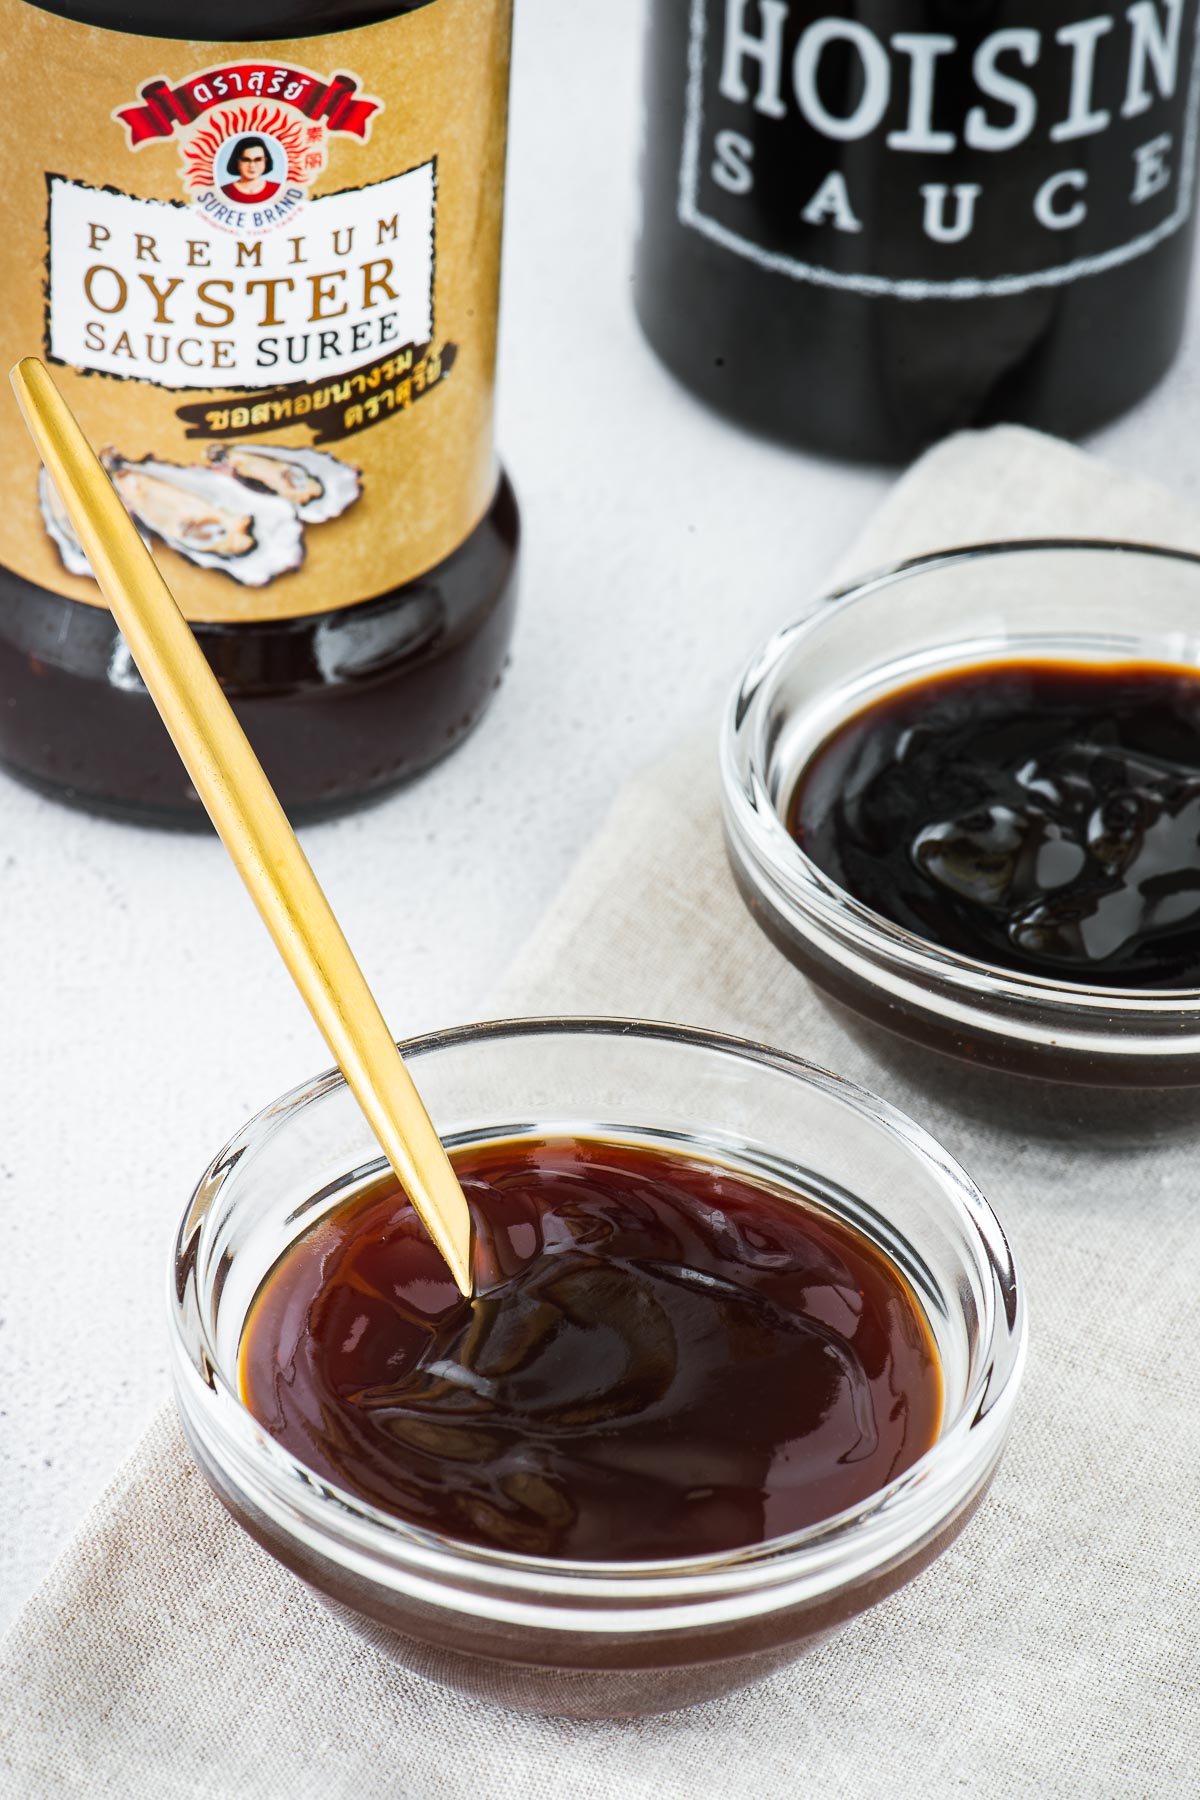 Hoisin Sauce vs Oyster Sauce: What’s so different?